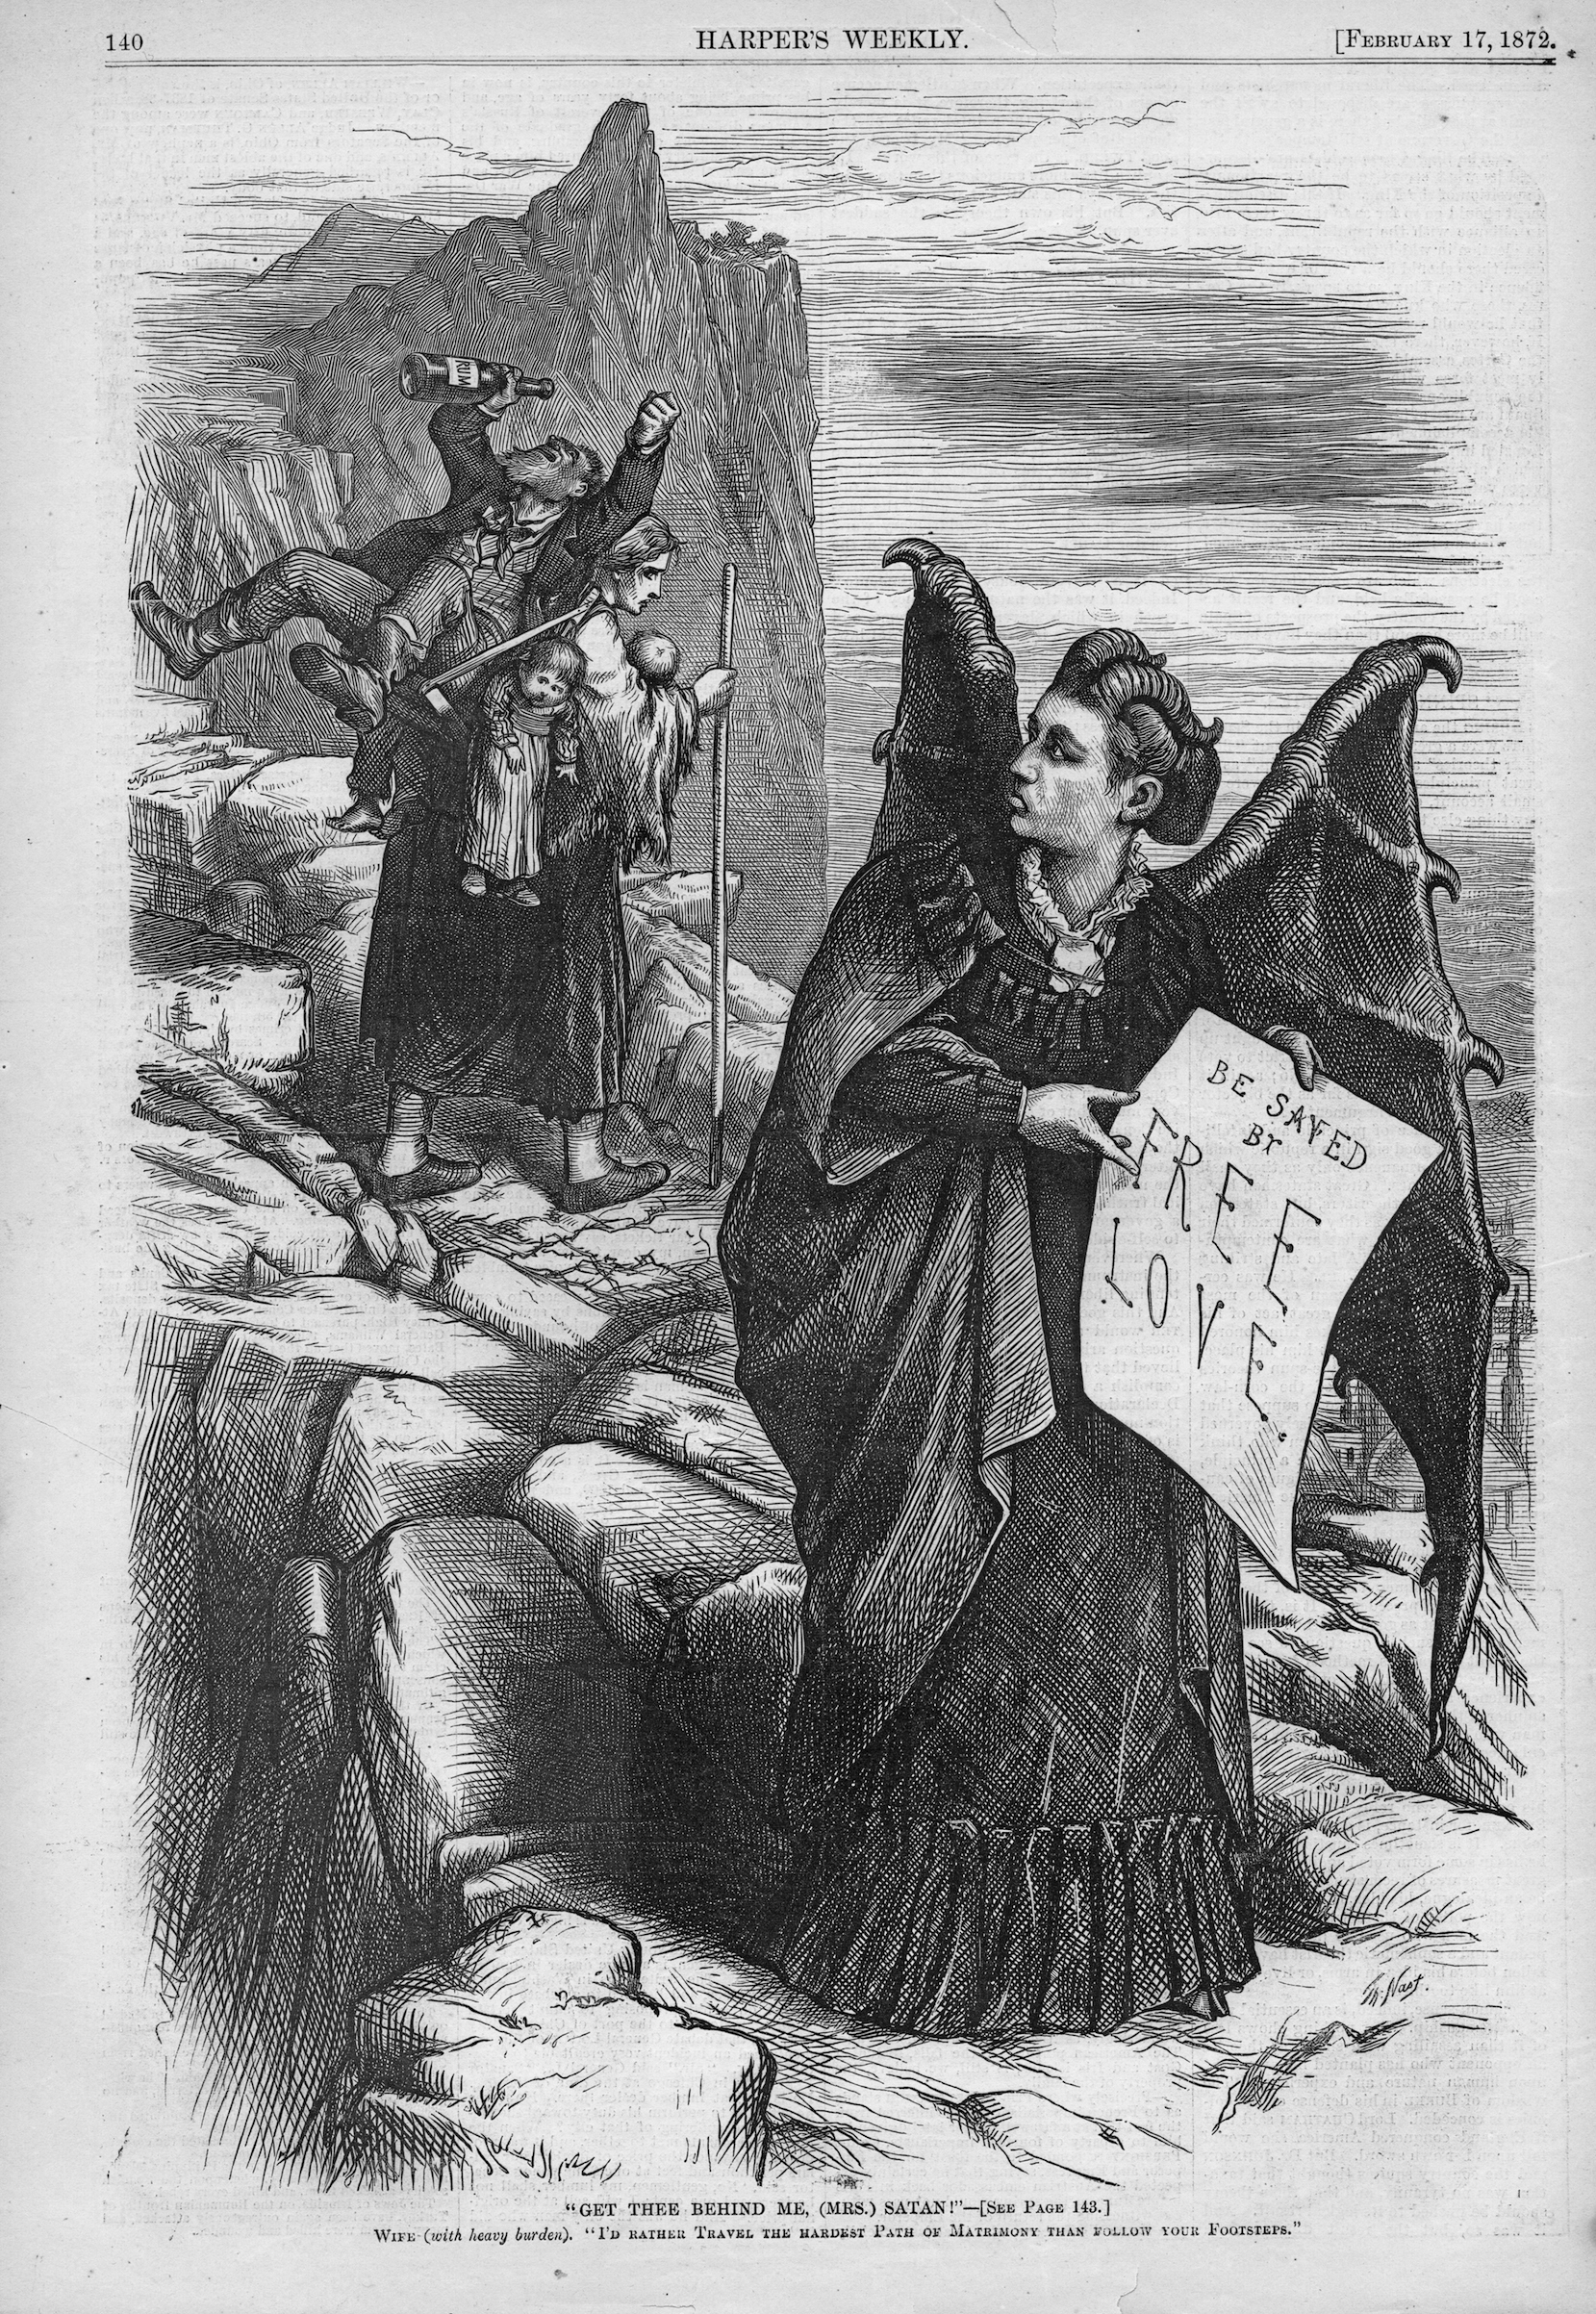 Print depicting suffragist Victoria Woodhull as a winged 'Mrs Satan, illustrated by Thomas Nast, and published in Harper's Weekly for the American market, 1872. (Ken Florey Suffrage Collection/Getty Images)